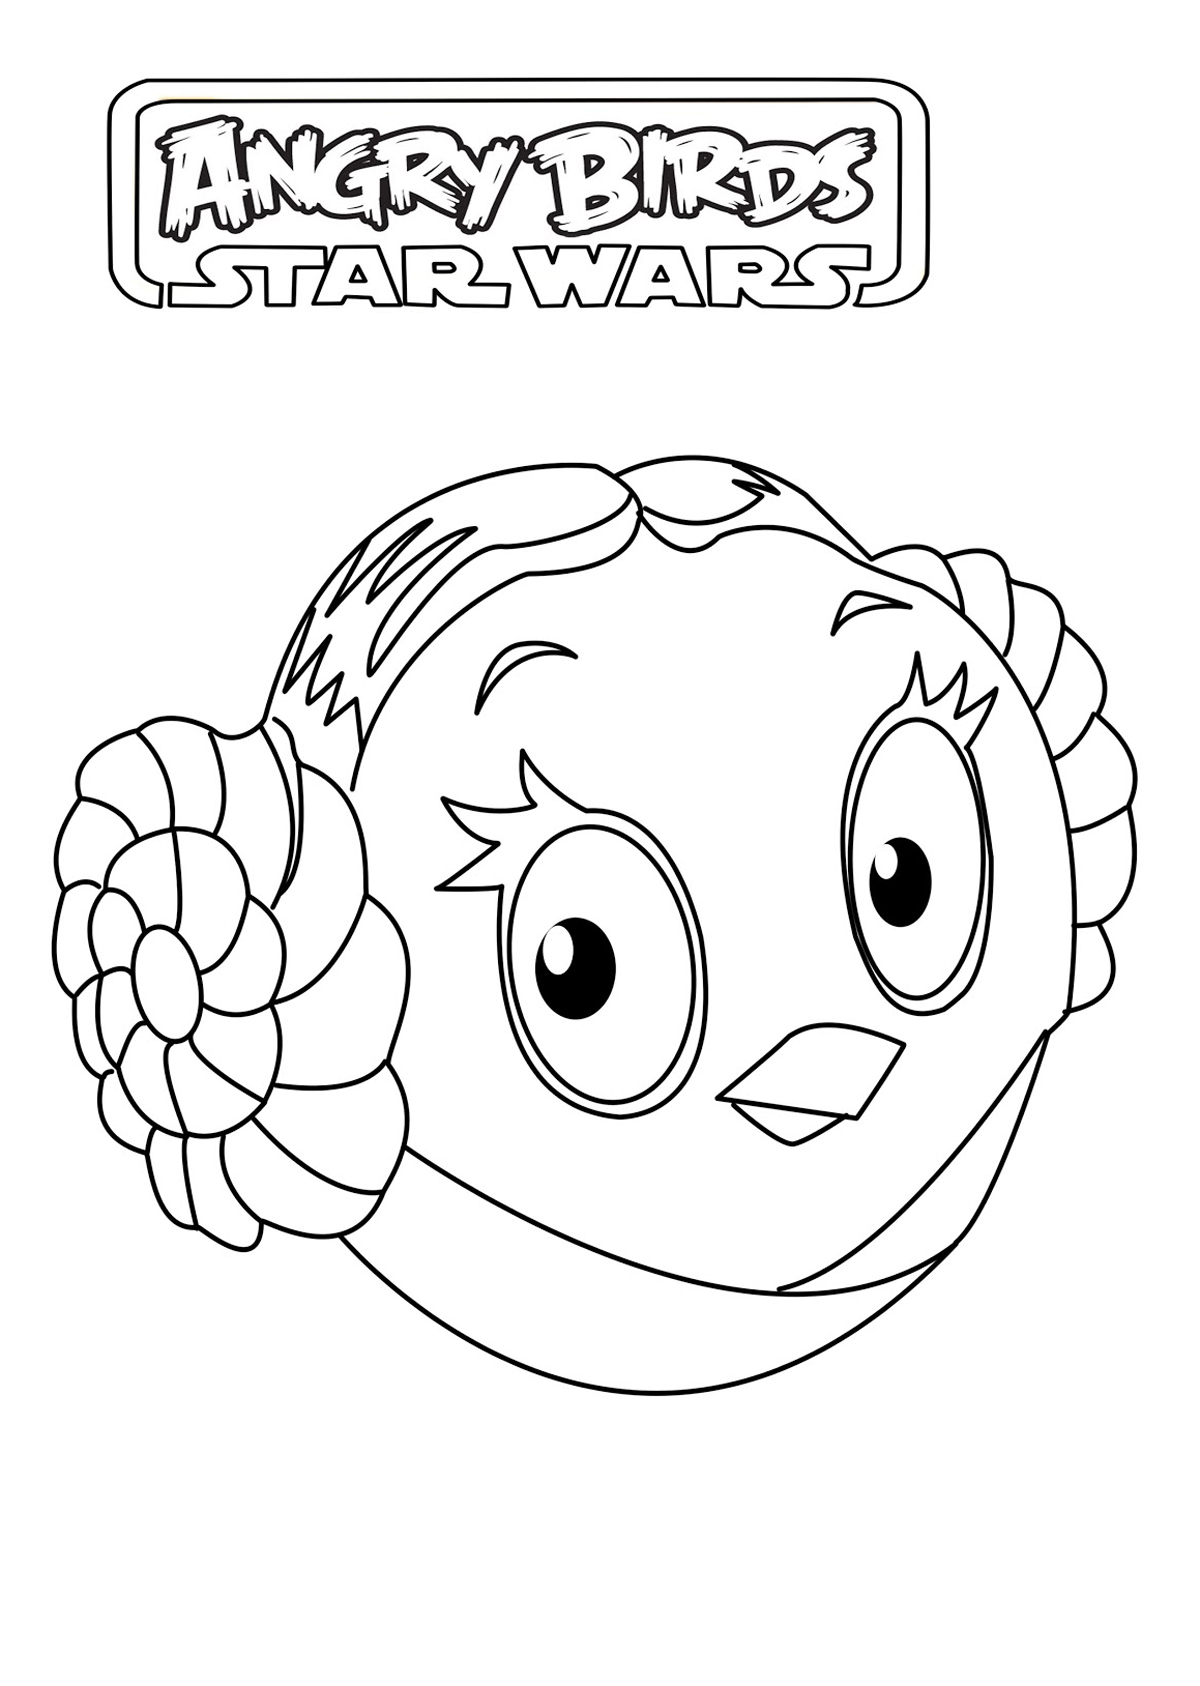 Angry birds star wars free to color for children Angry